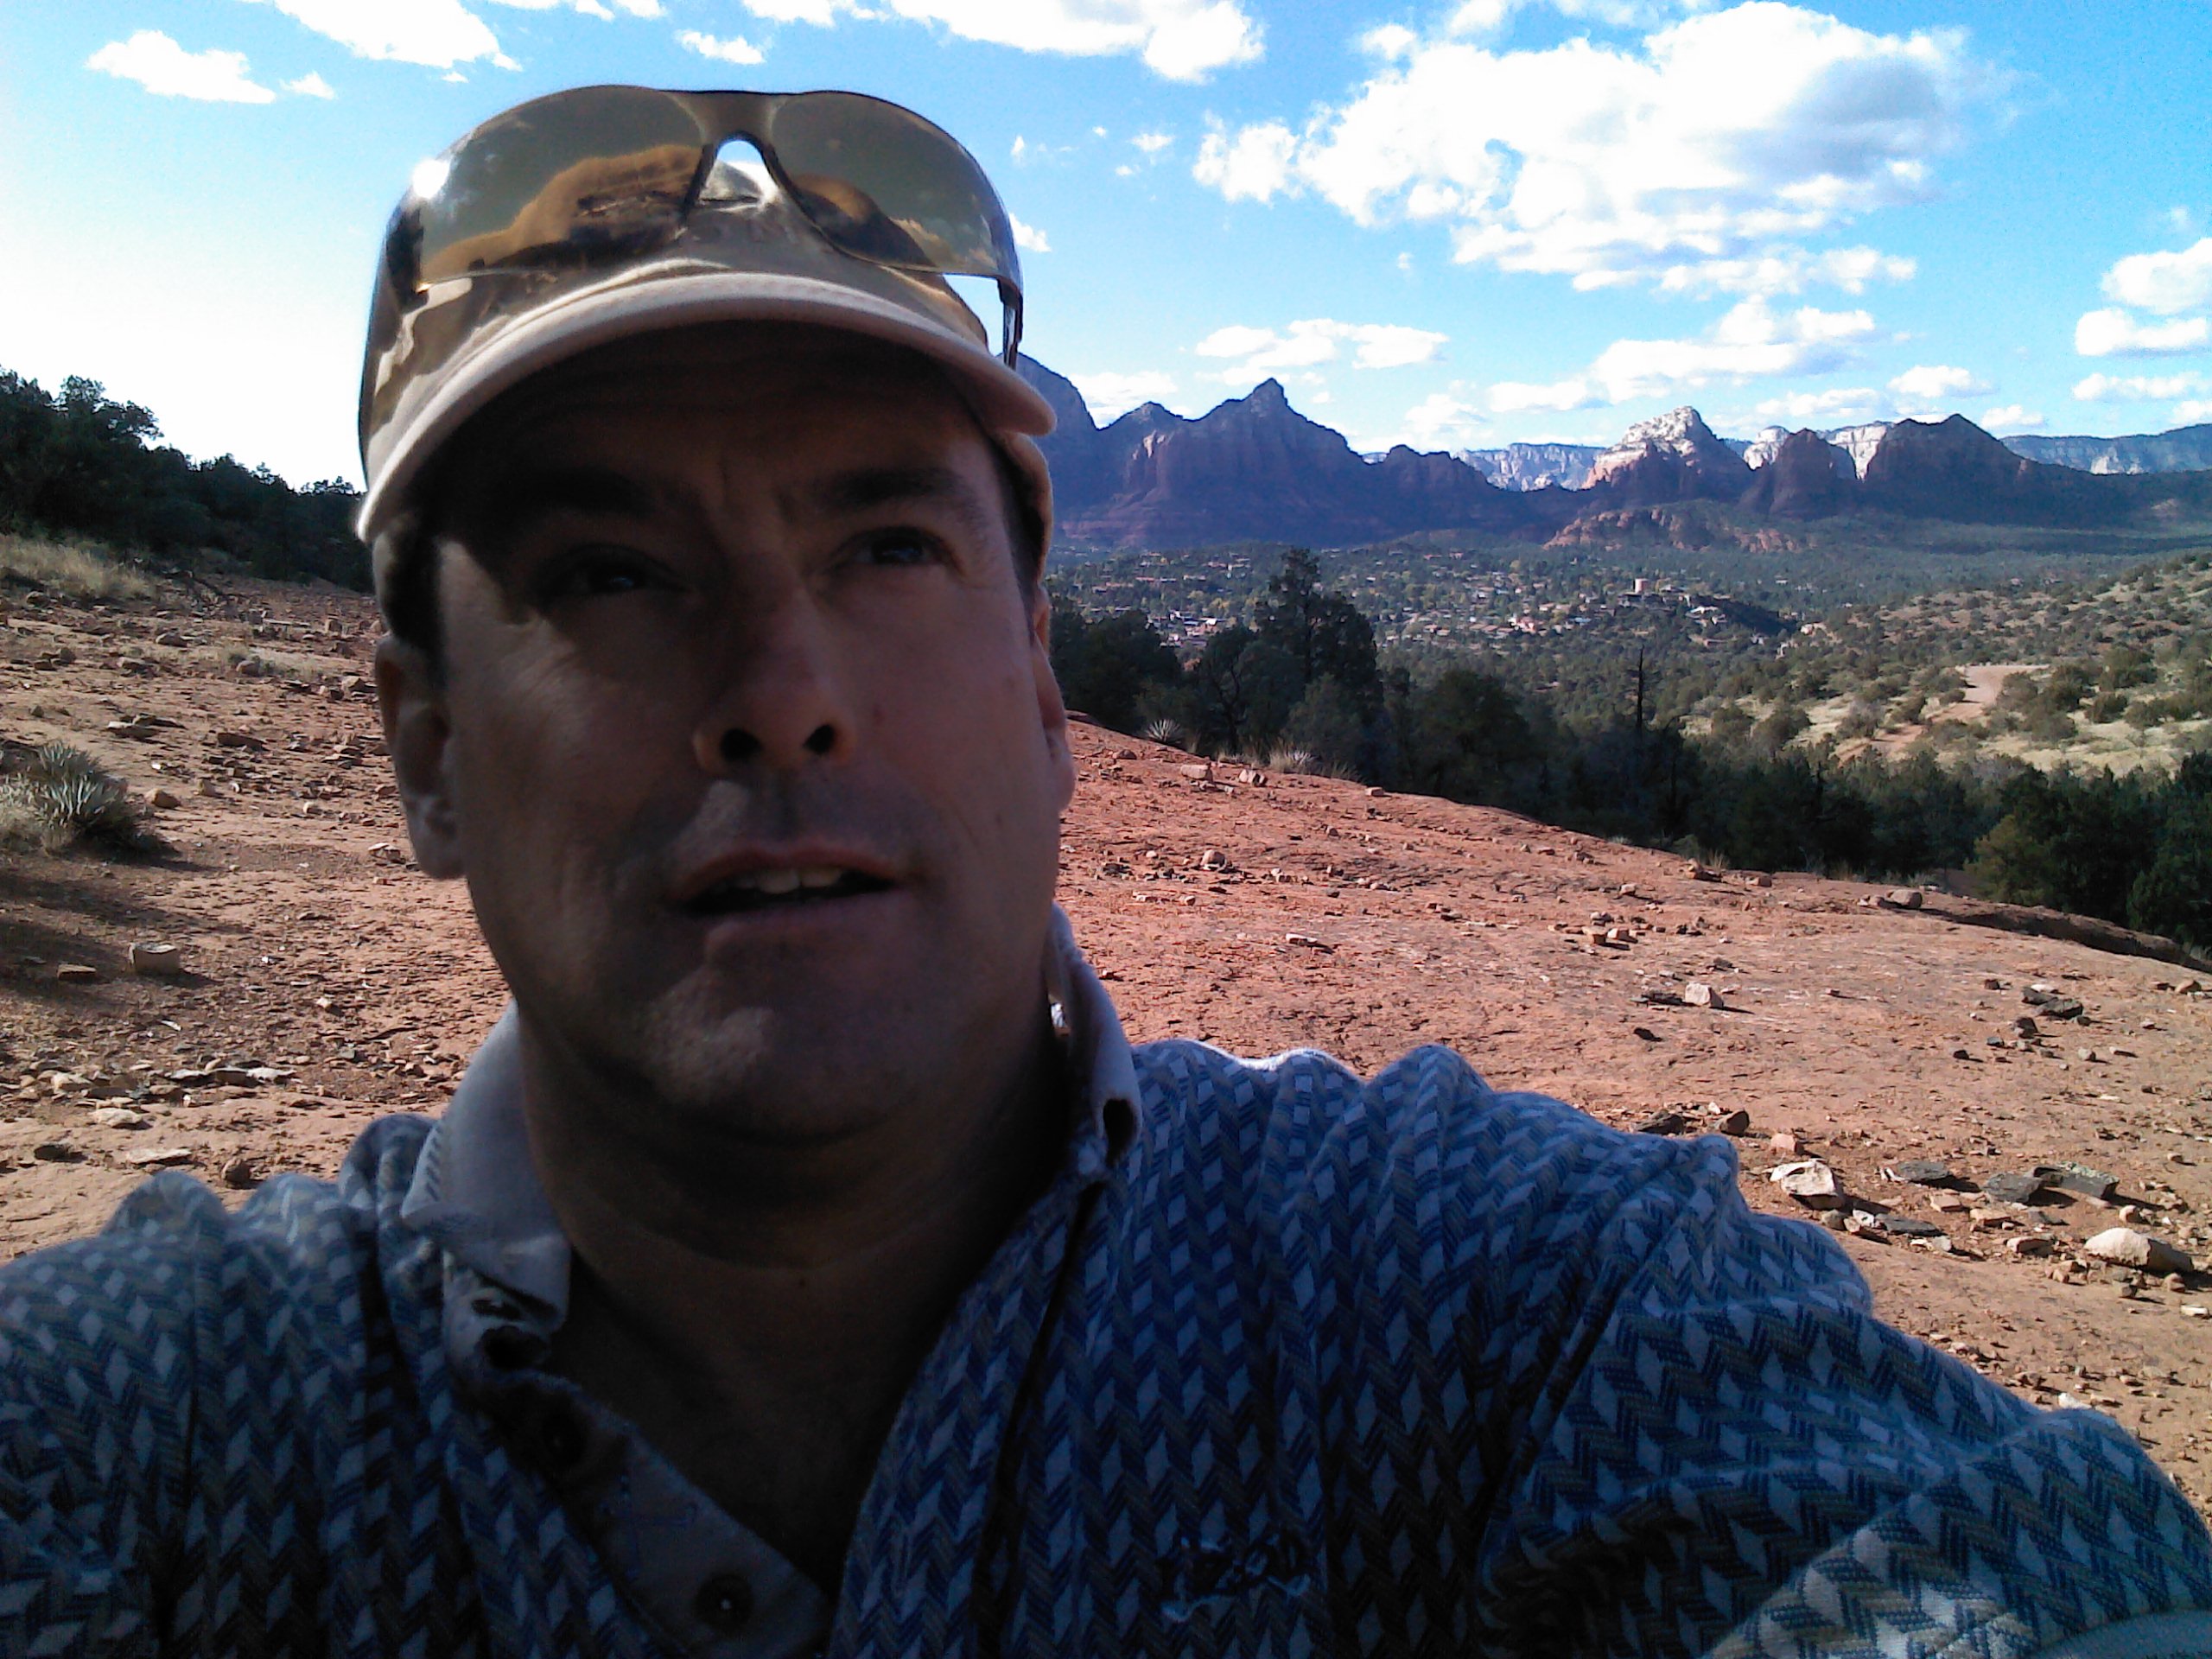 Another beautiful day in Sedona!